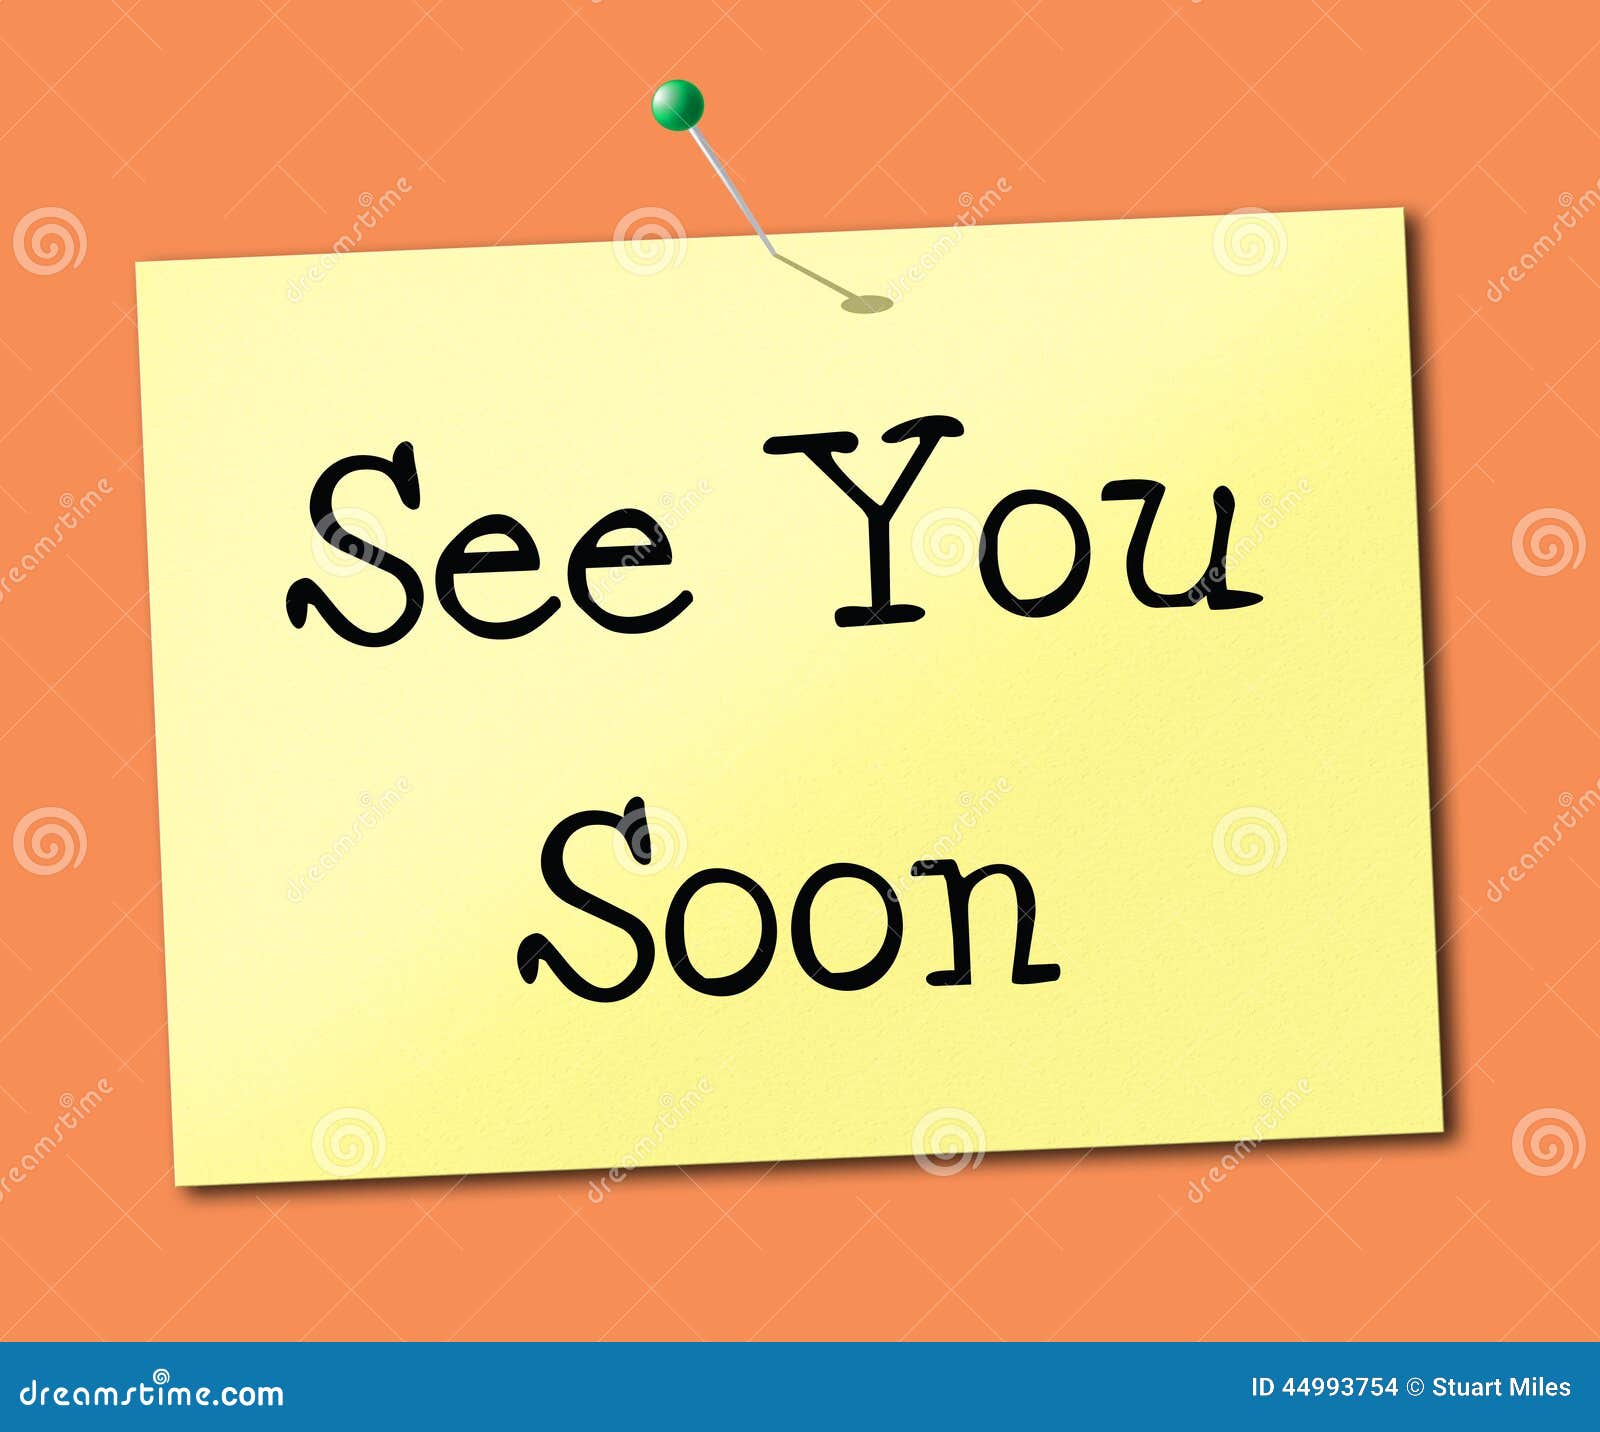 clipart see you soon - photo #18